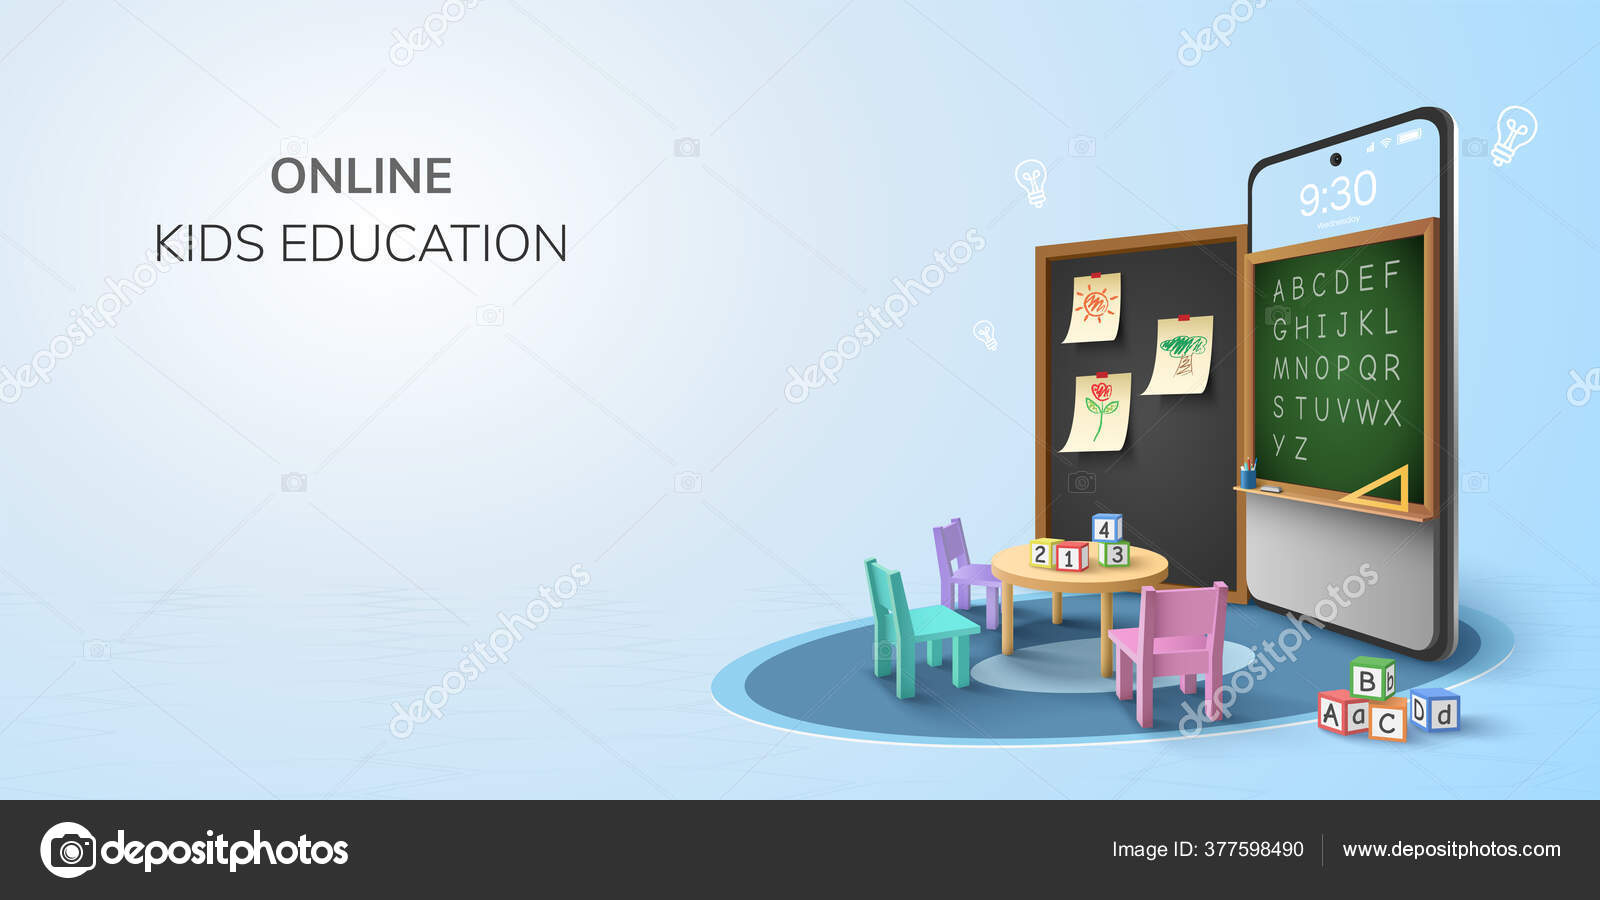 Desk Is Set Up In A Classroom Background, 3d Illustration, School Classroom  With A Smartphone In Front, E Learning And Online Education Concept  Background Image And Wallpaper for Free Download